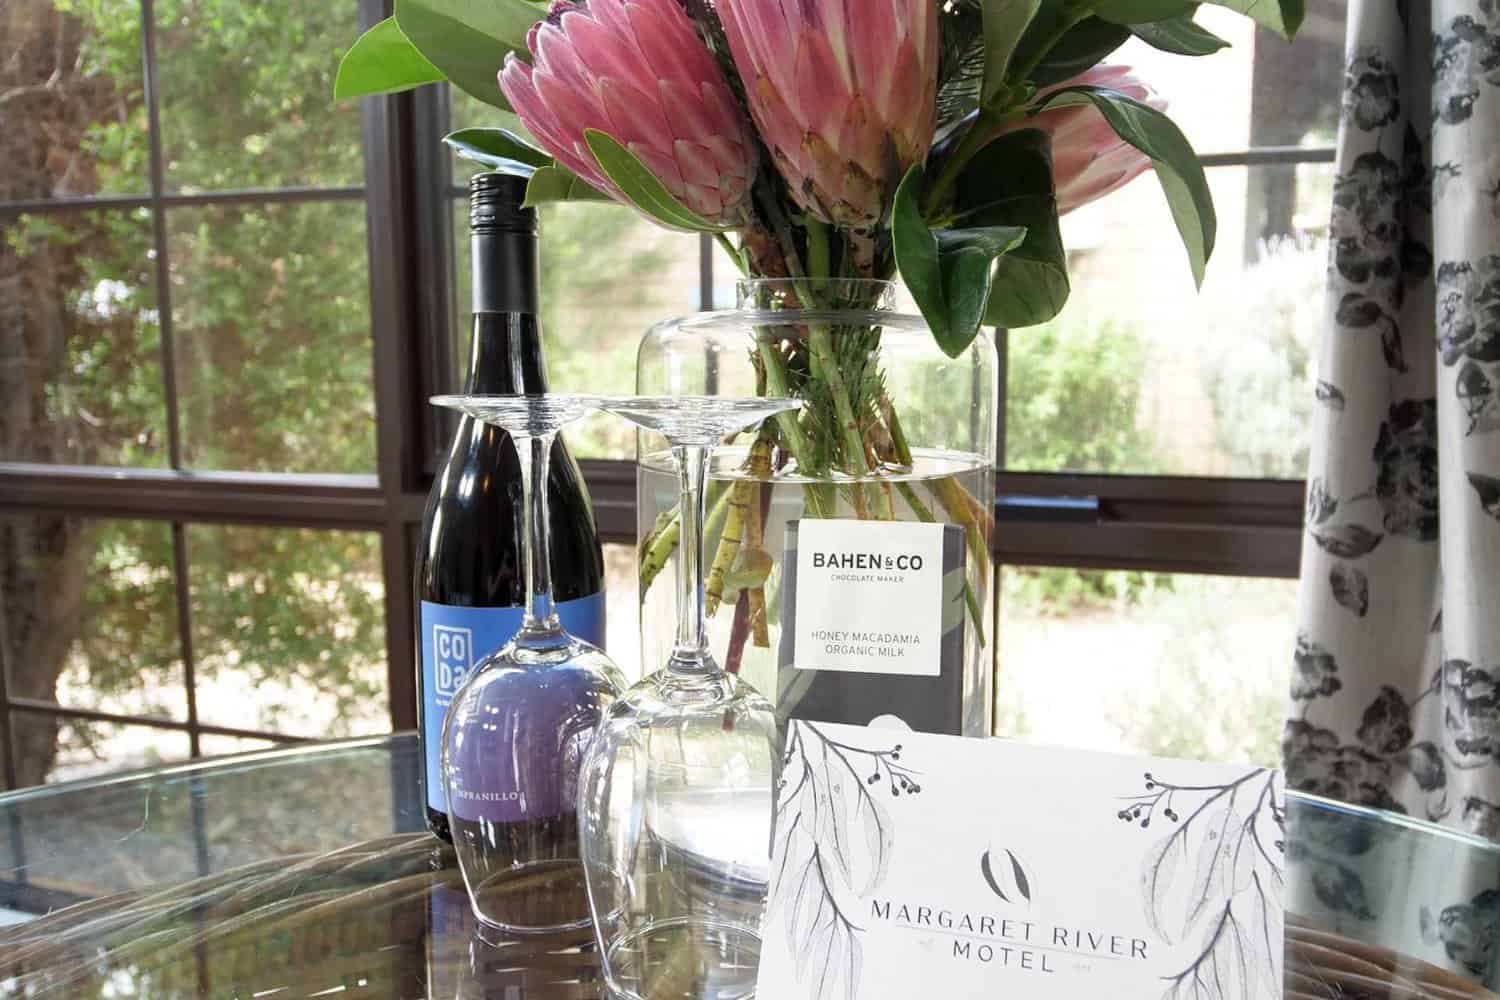 A welcoming hotel room scene with a bottle of red wine and two glasses set on a glass table, accompanied by a vibrant pink protea bouquet and a bar of Bahen & Co. honey macadamia chocolate, with a 'Margaret River Motel' pamphlet suggesting local flair.